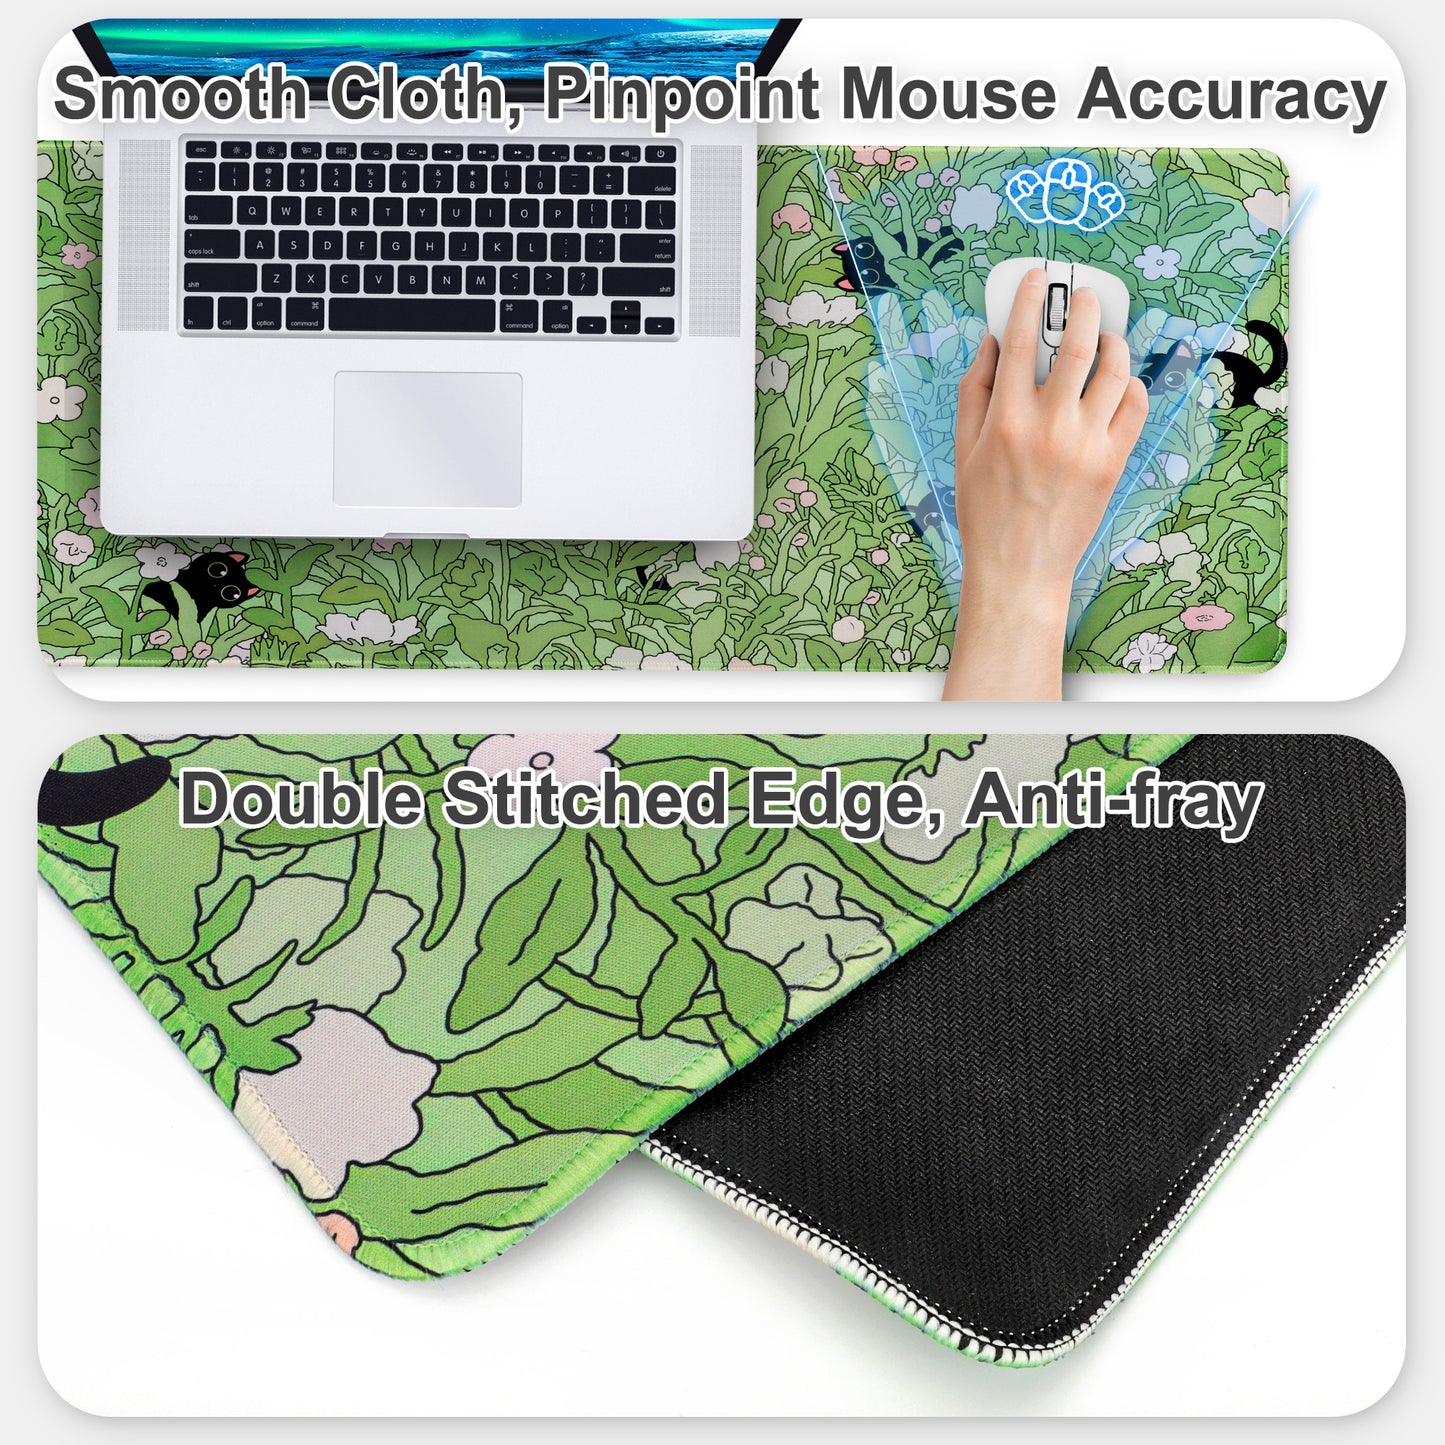 Green Cute Animal Desk Large Mouse Pad - For Desk, Keyboard Mat Kawaii Black Cat Flower Mouse Pad Green Desk Mat Desk Decor With Stitched Edges Non-Slip Large Computer Mat 31.5 x 11.8 in